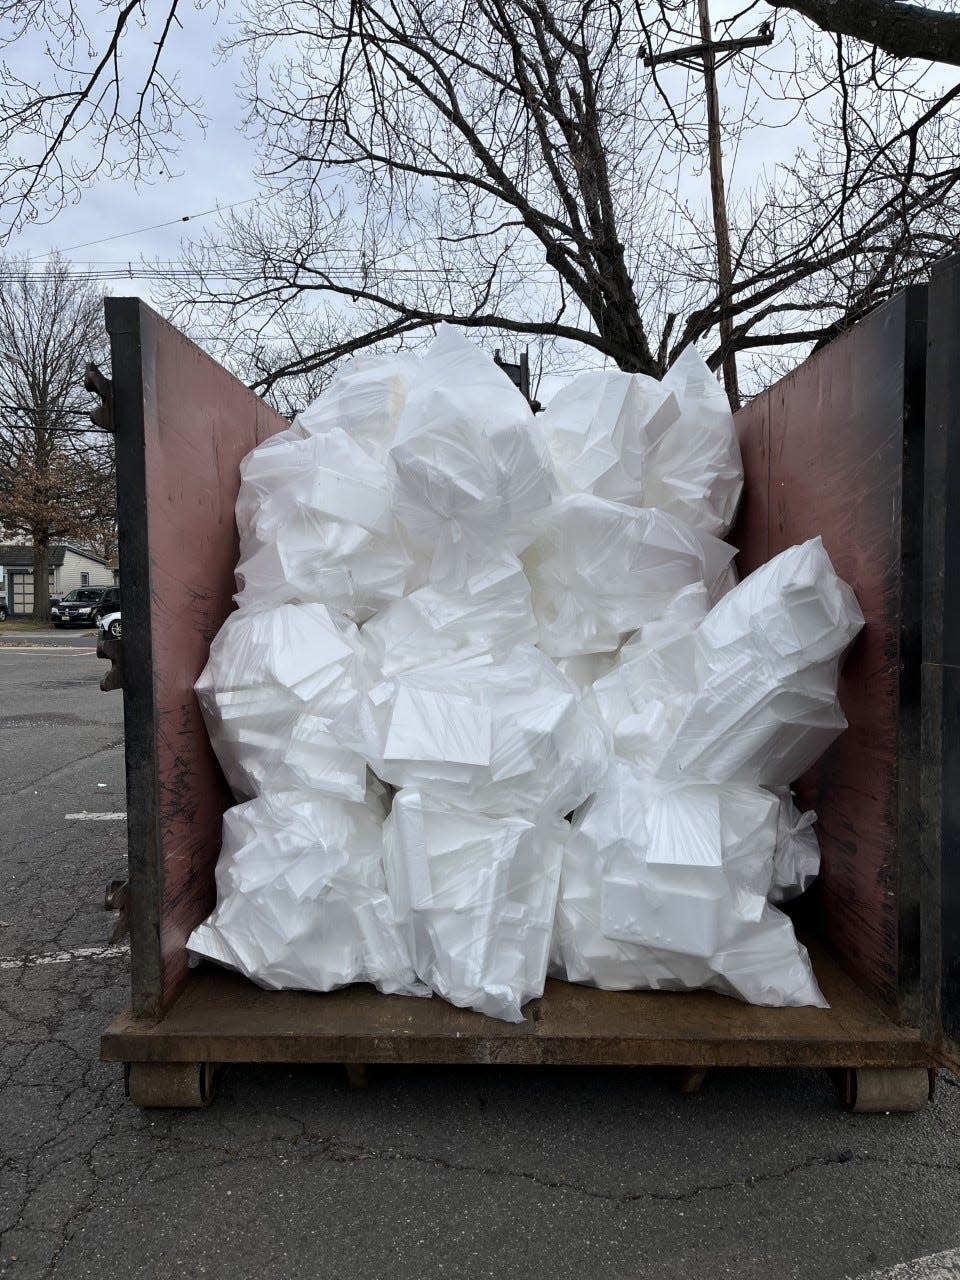 Some of the results of the Polystyrene drive in Hawthorne.